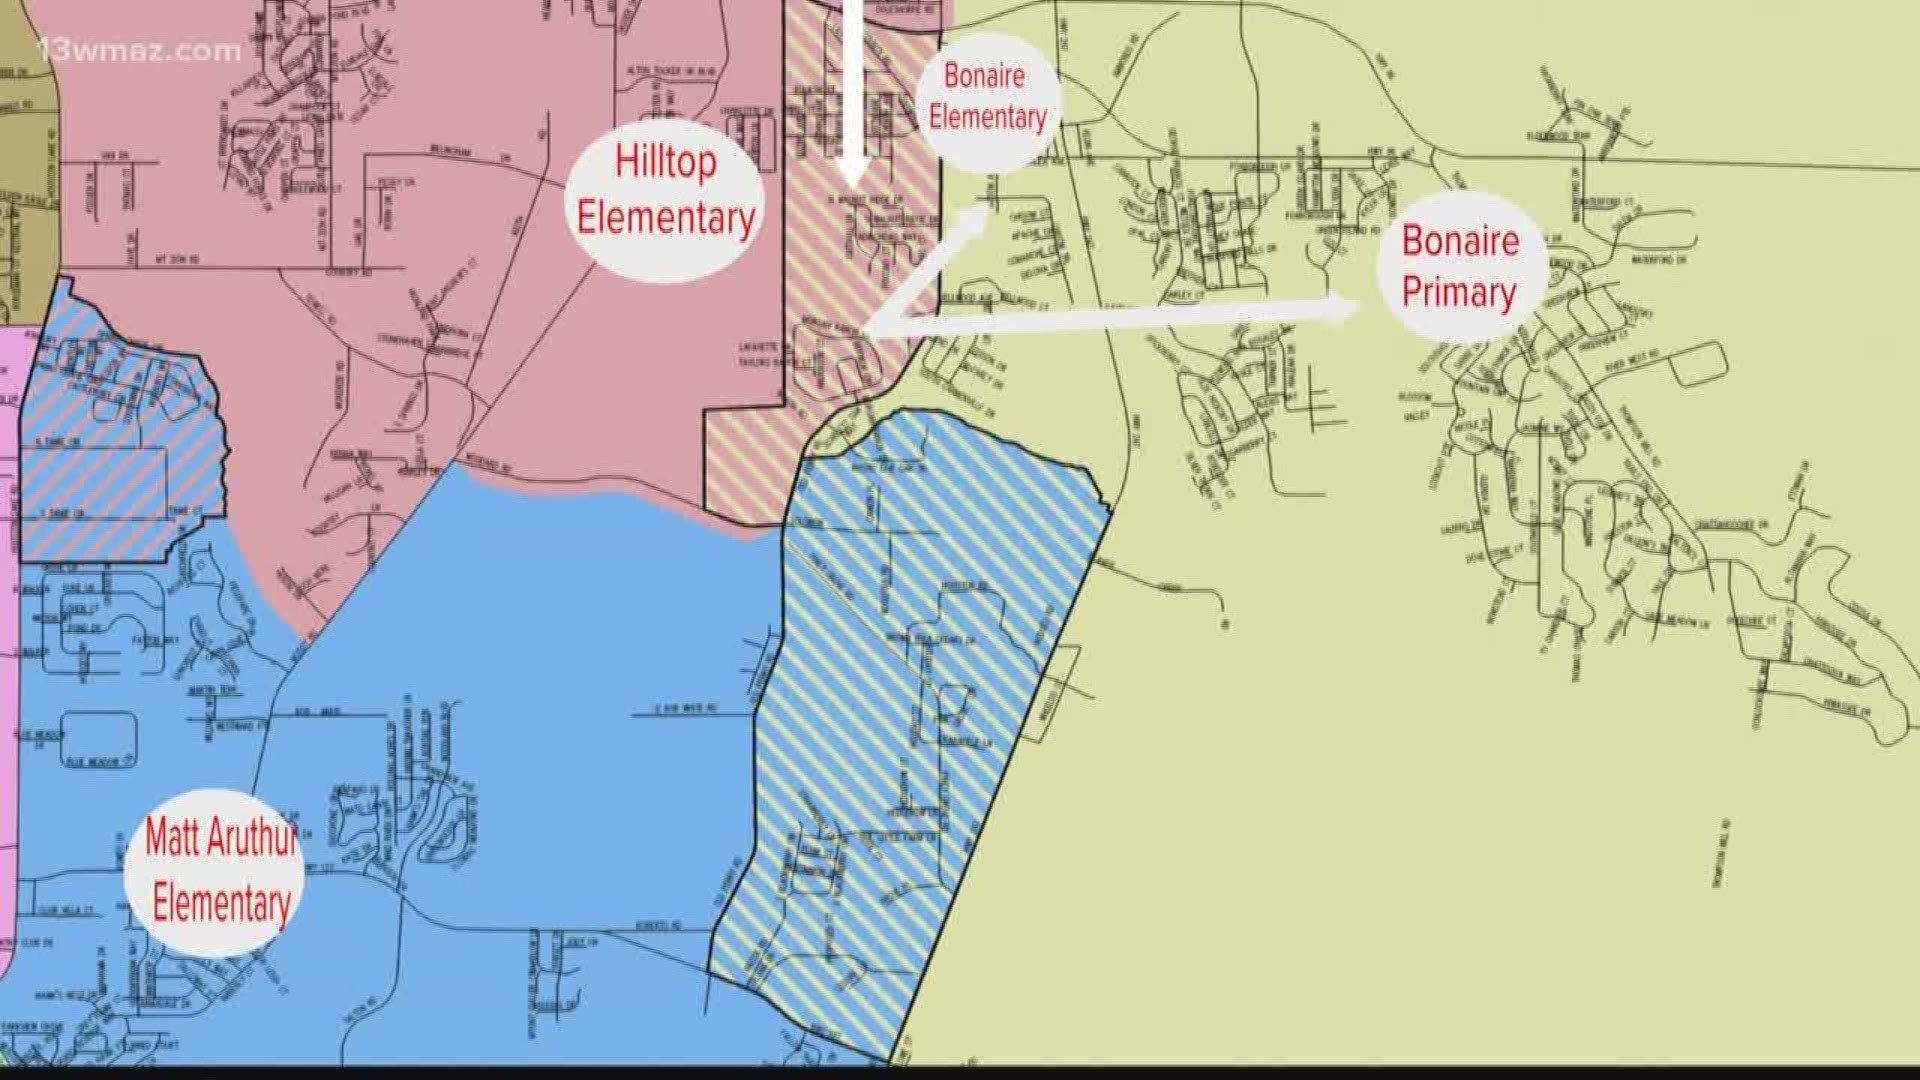 Bonaire Primary is set to open later this year, and Houston County Schools is hosting a meeting for parents to talk about rezoning plans.